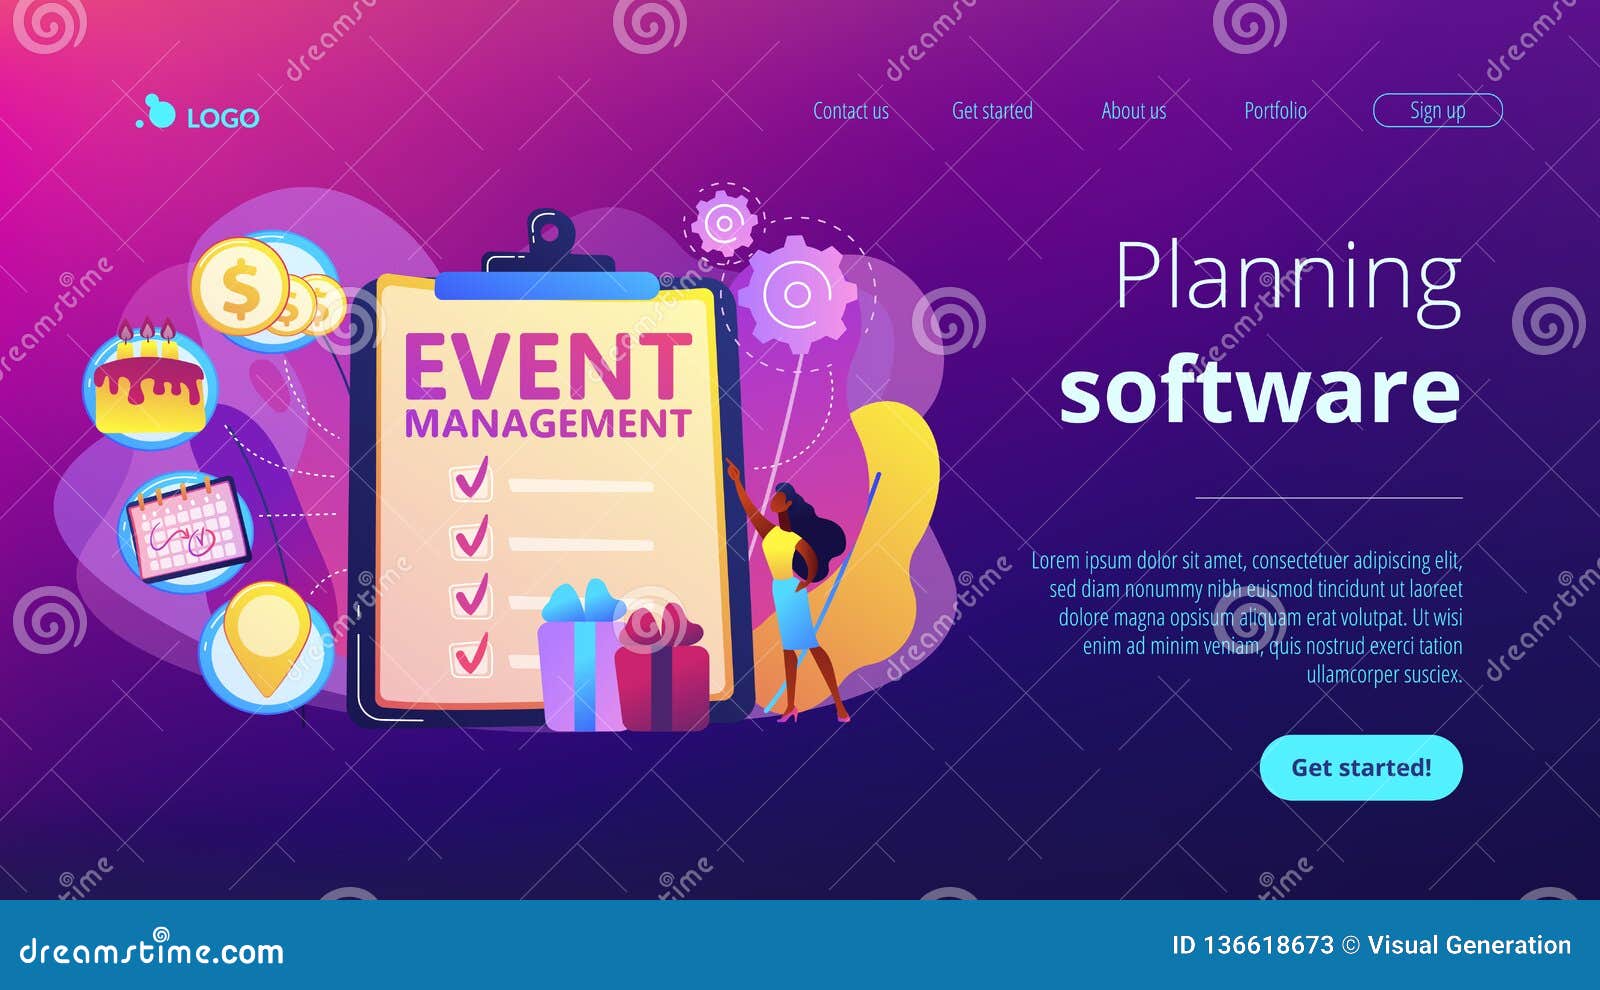 Event planner website template free download word document